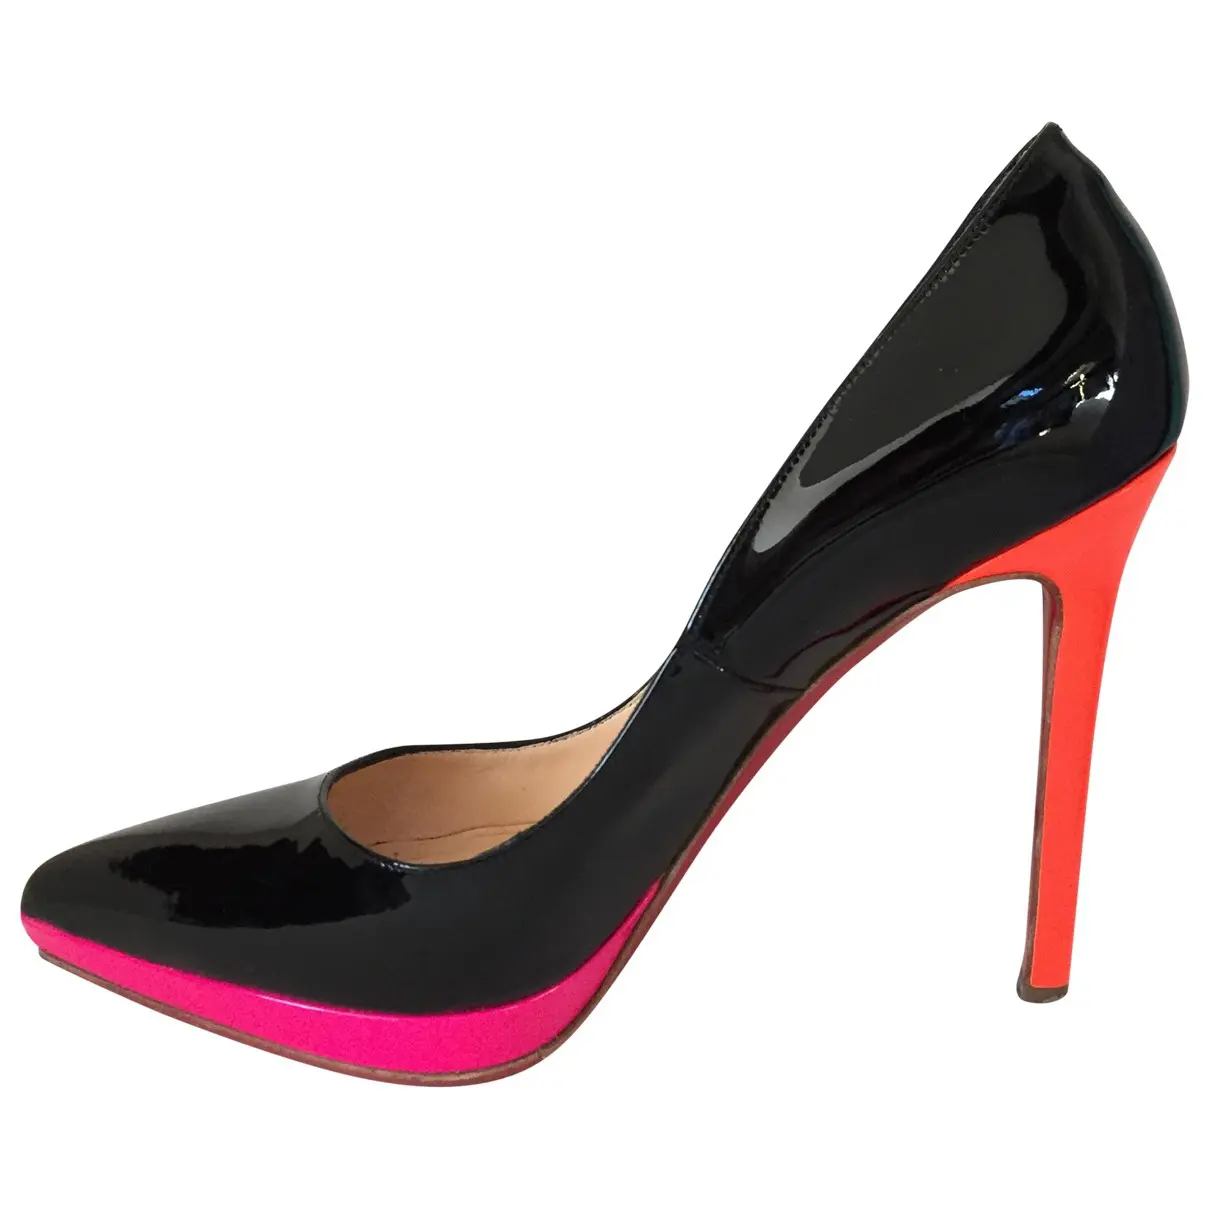 Black Patent leather Heels Pigalle Christian Louboutin